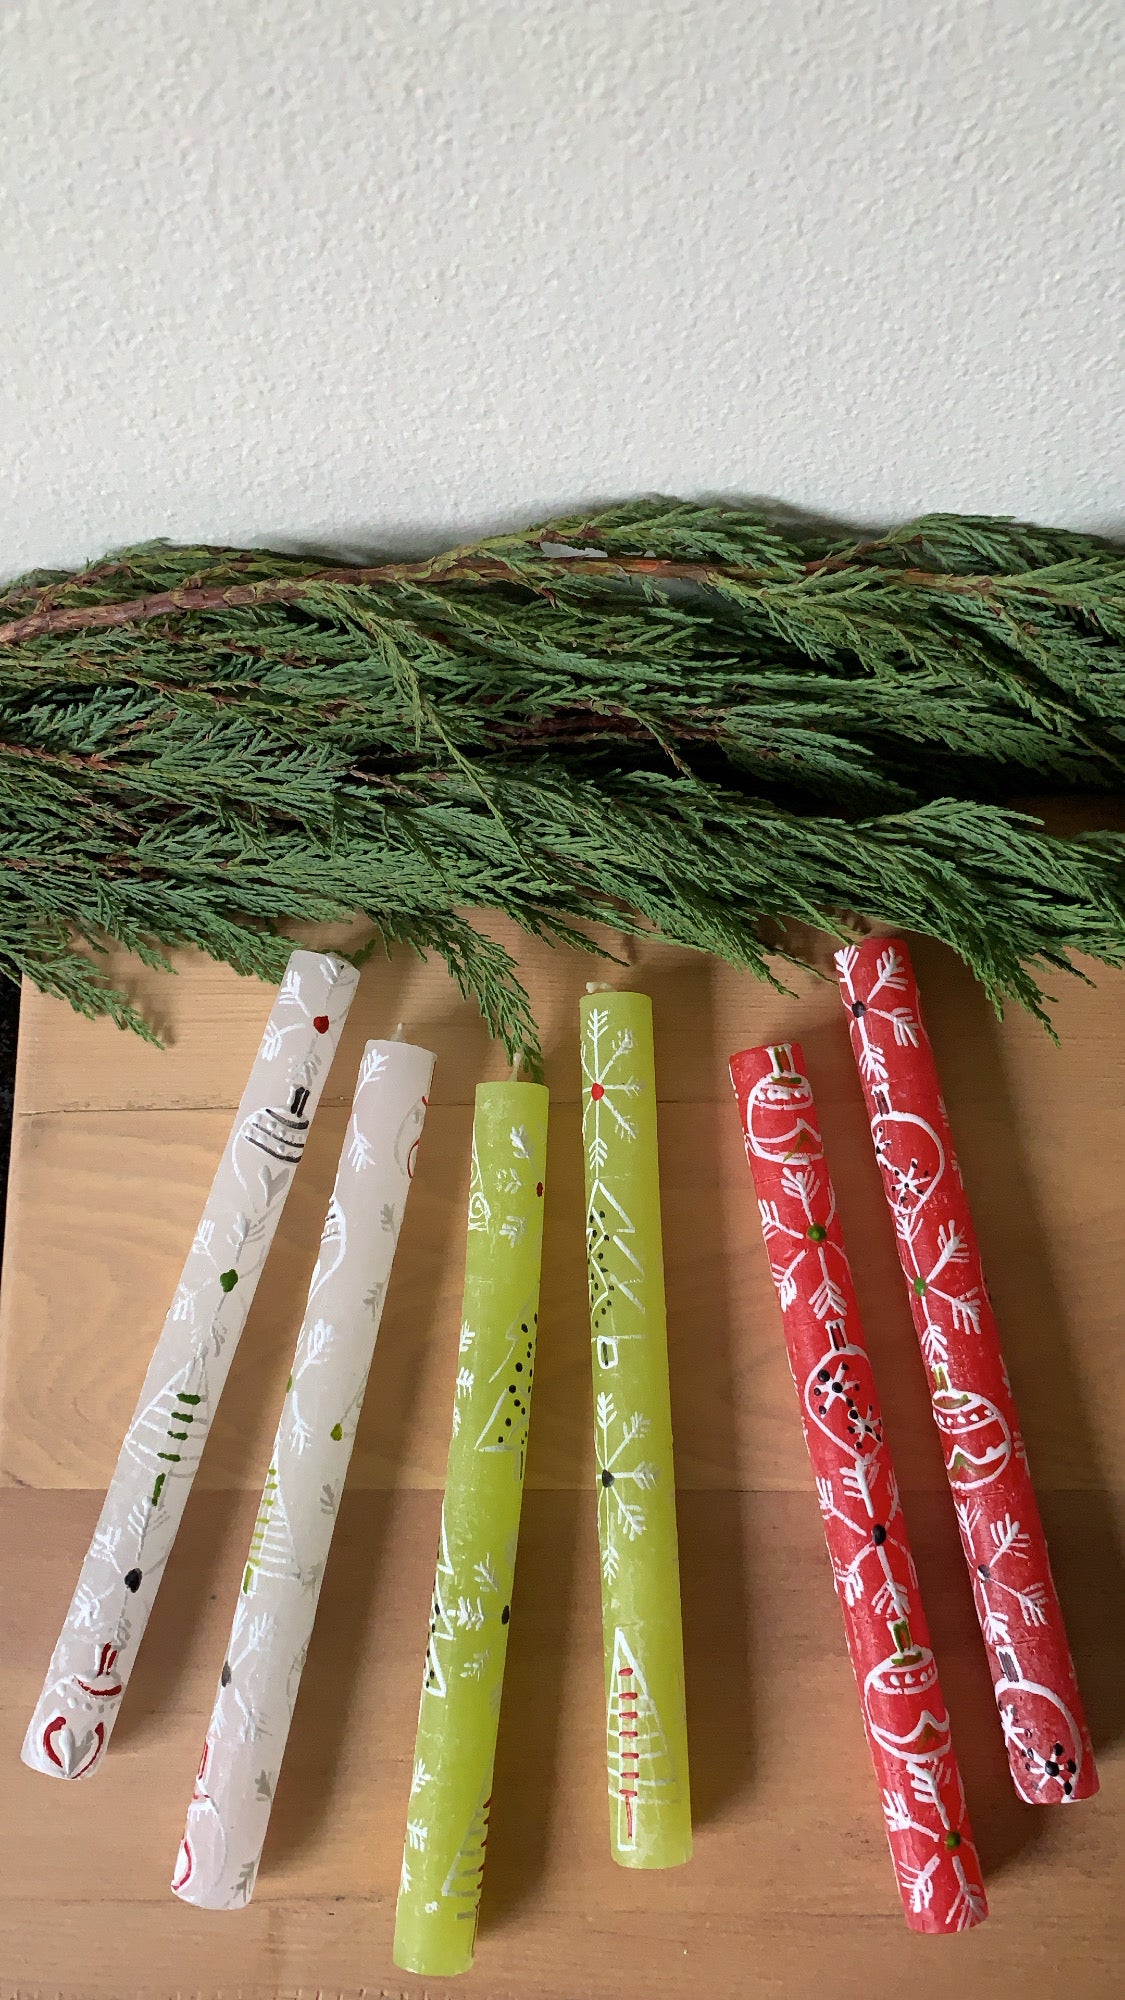 Three pairs of Whimsy Christmas taper candles; base candles are red, white & green, each hand painted with 'whimsy' Christmas designs such as snow flakes, trees, and ornaments in white with accent colors of red and green. These are presented on a table with green fur tree.